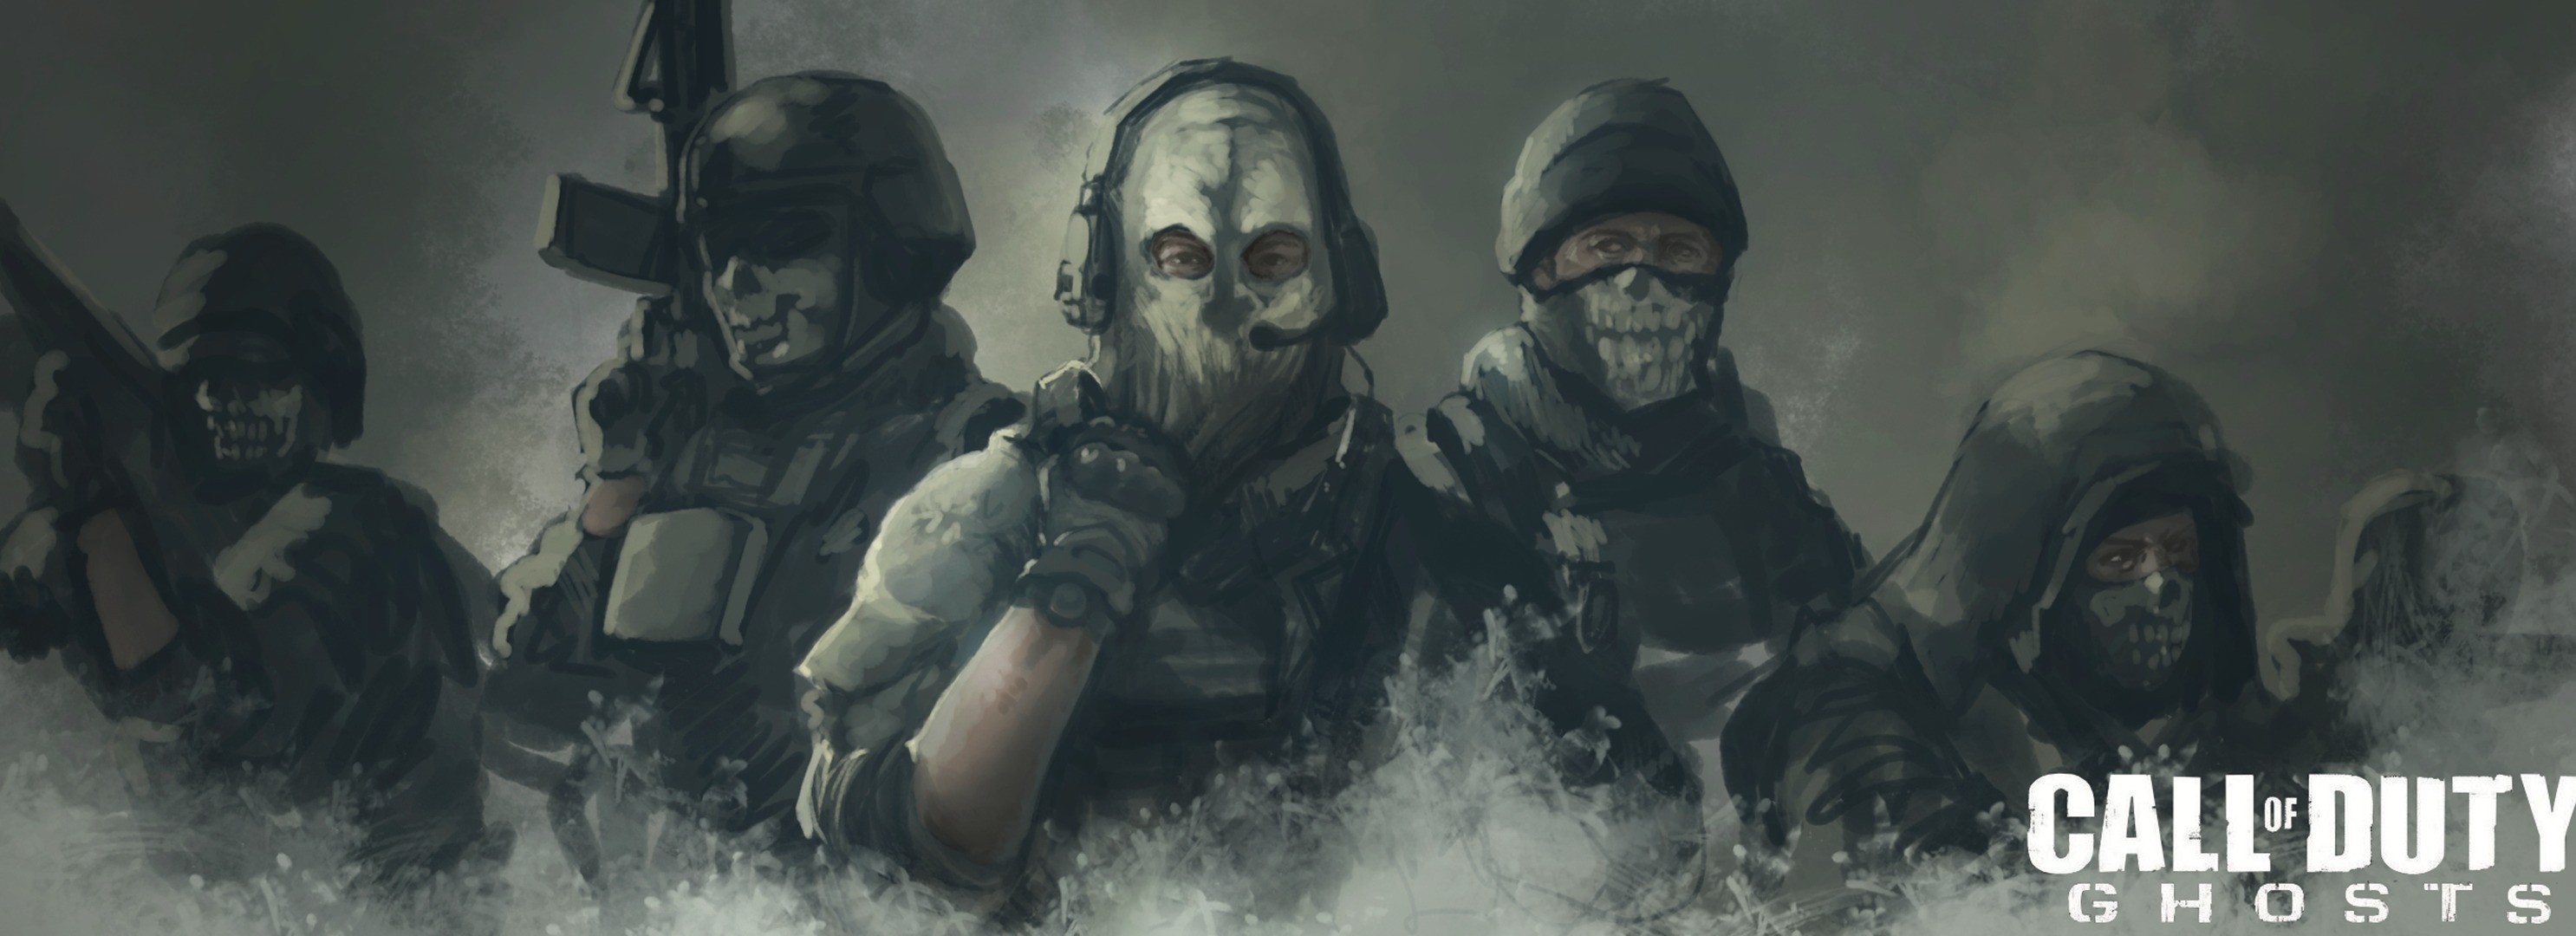 video Games, Artwork, Call Of Duty: Ghosts Wallpaper